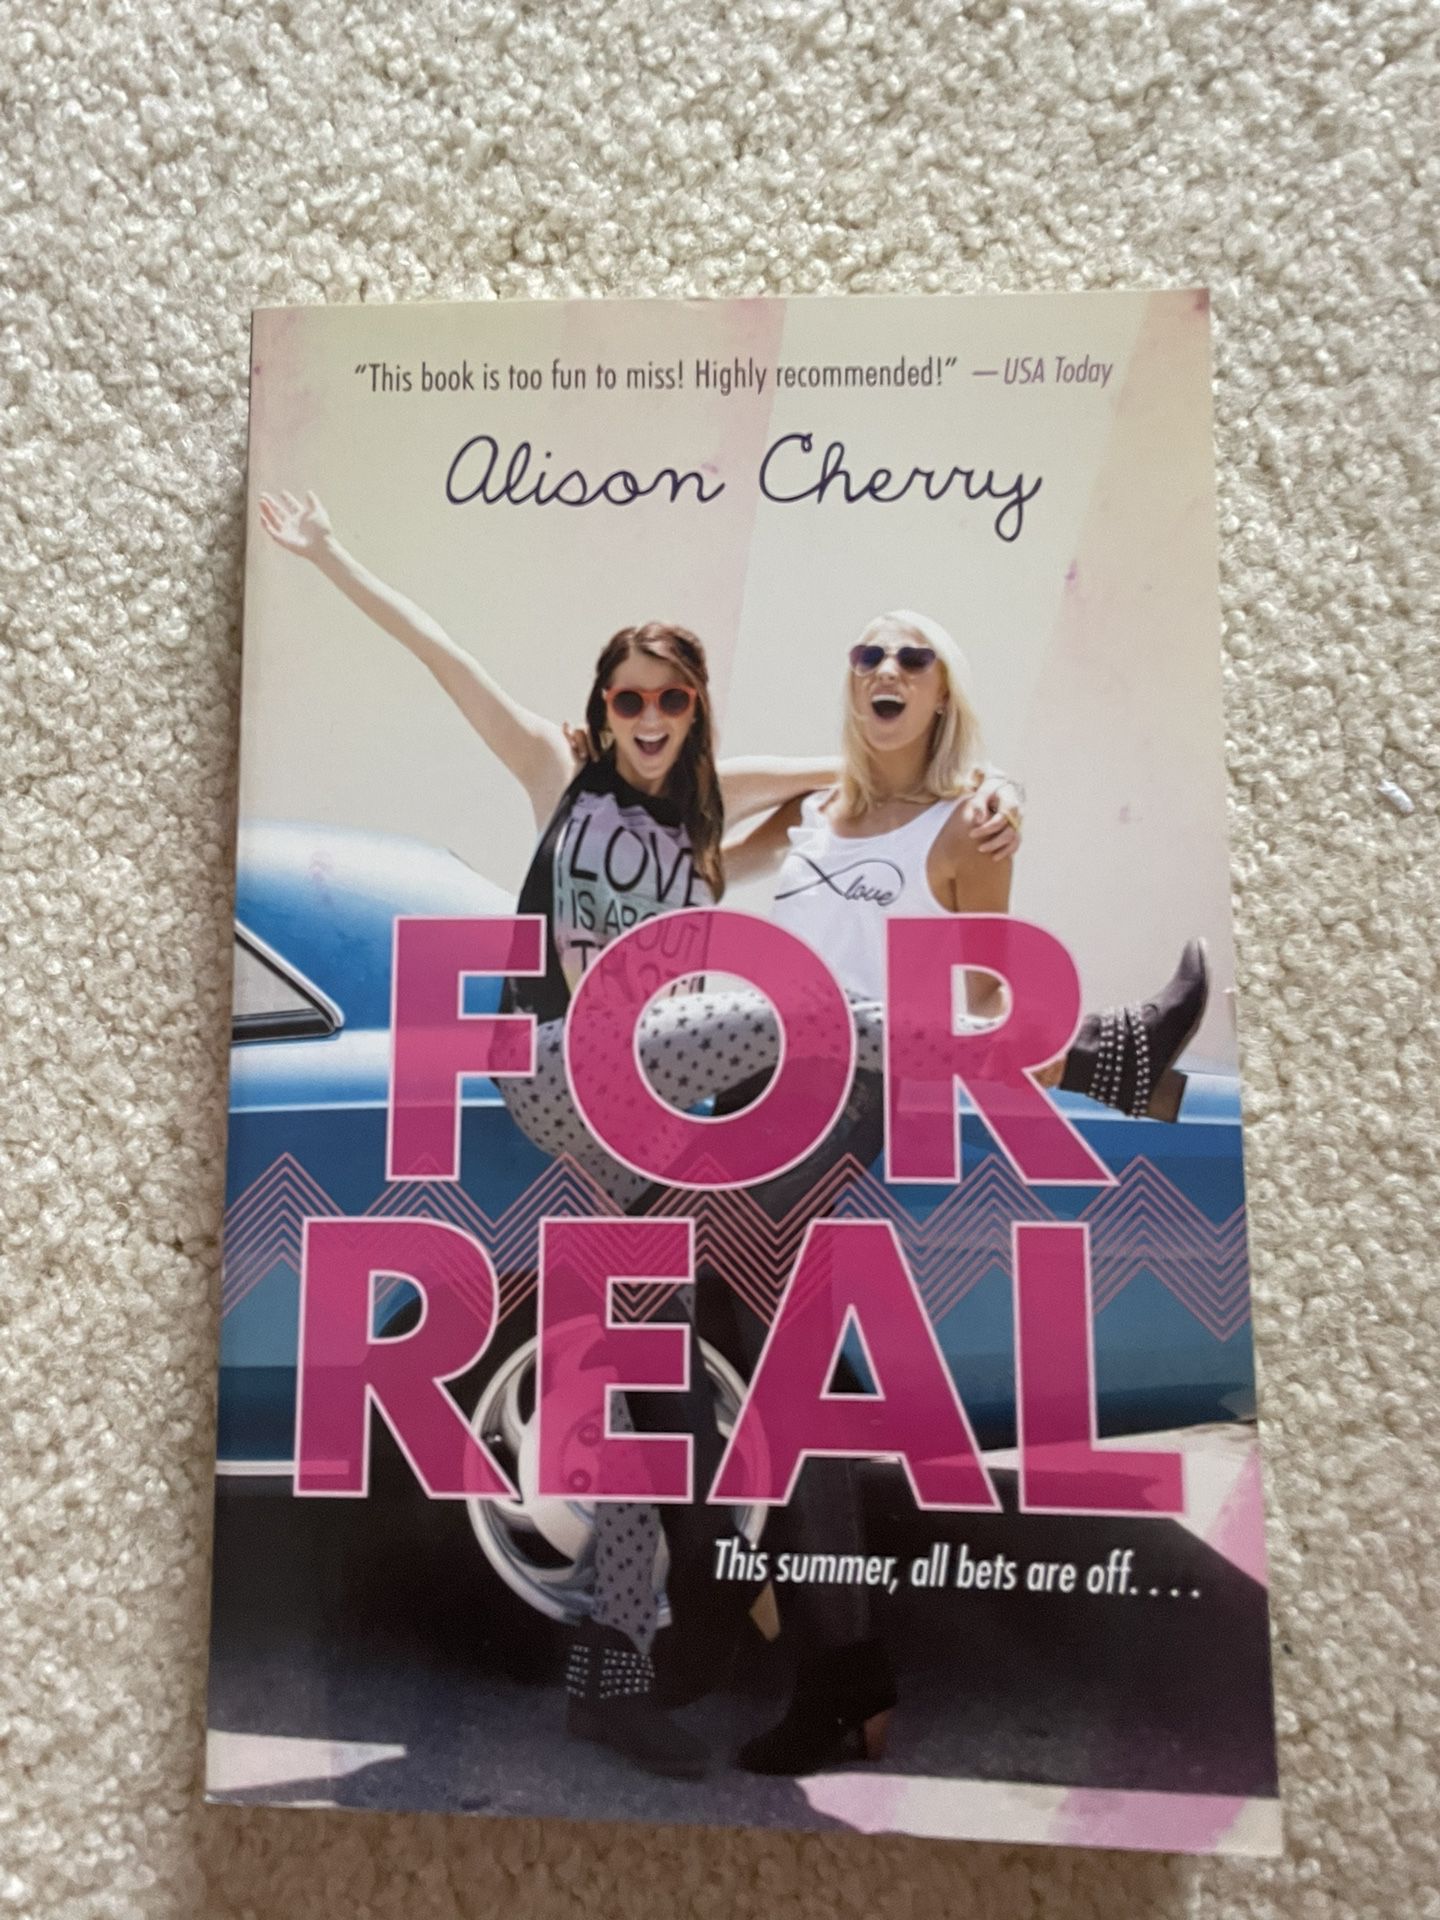 For Real by Alison Cherry 